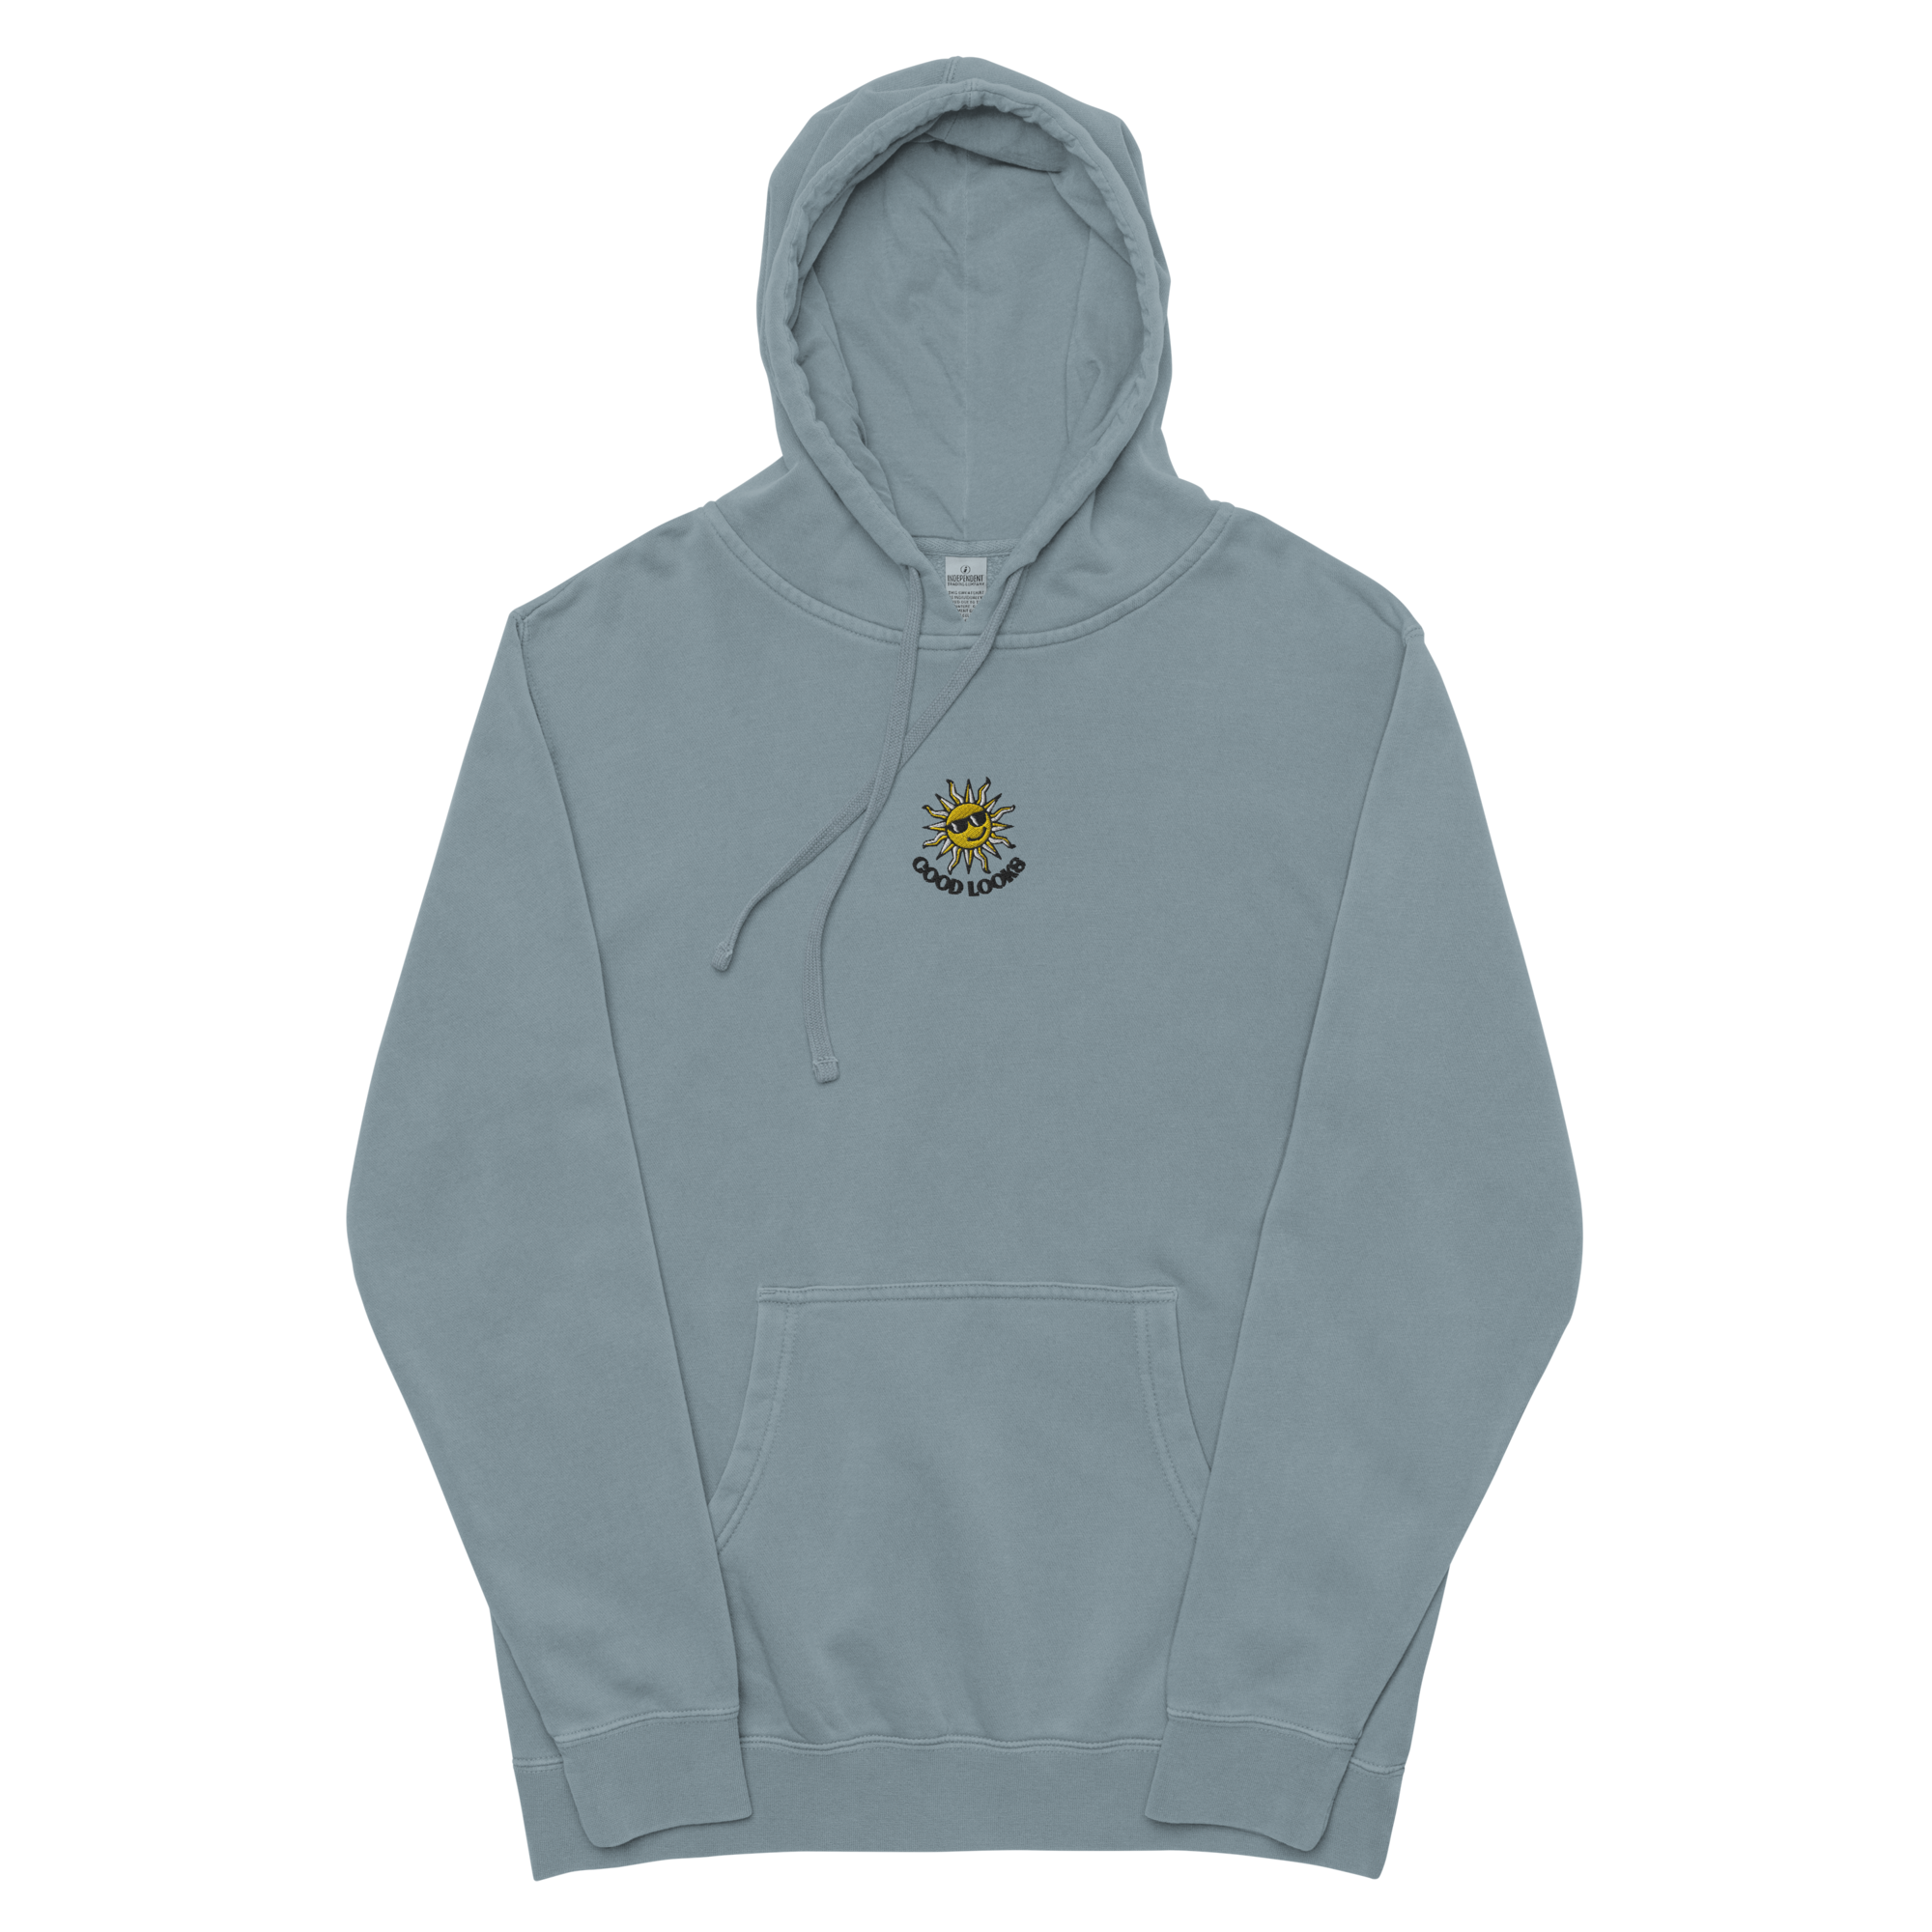 Stoked Embroidered Hoodie